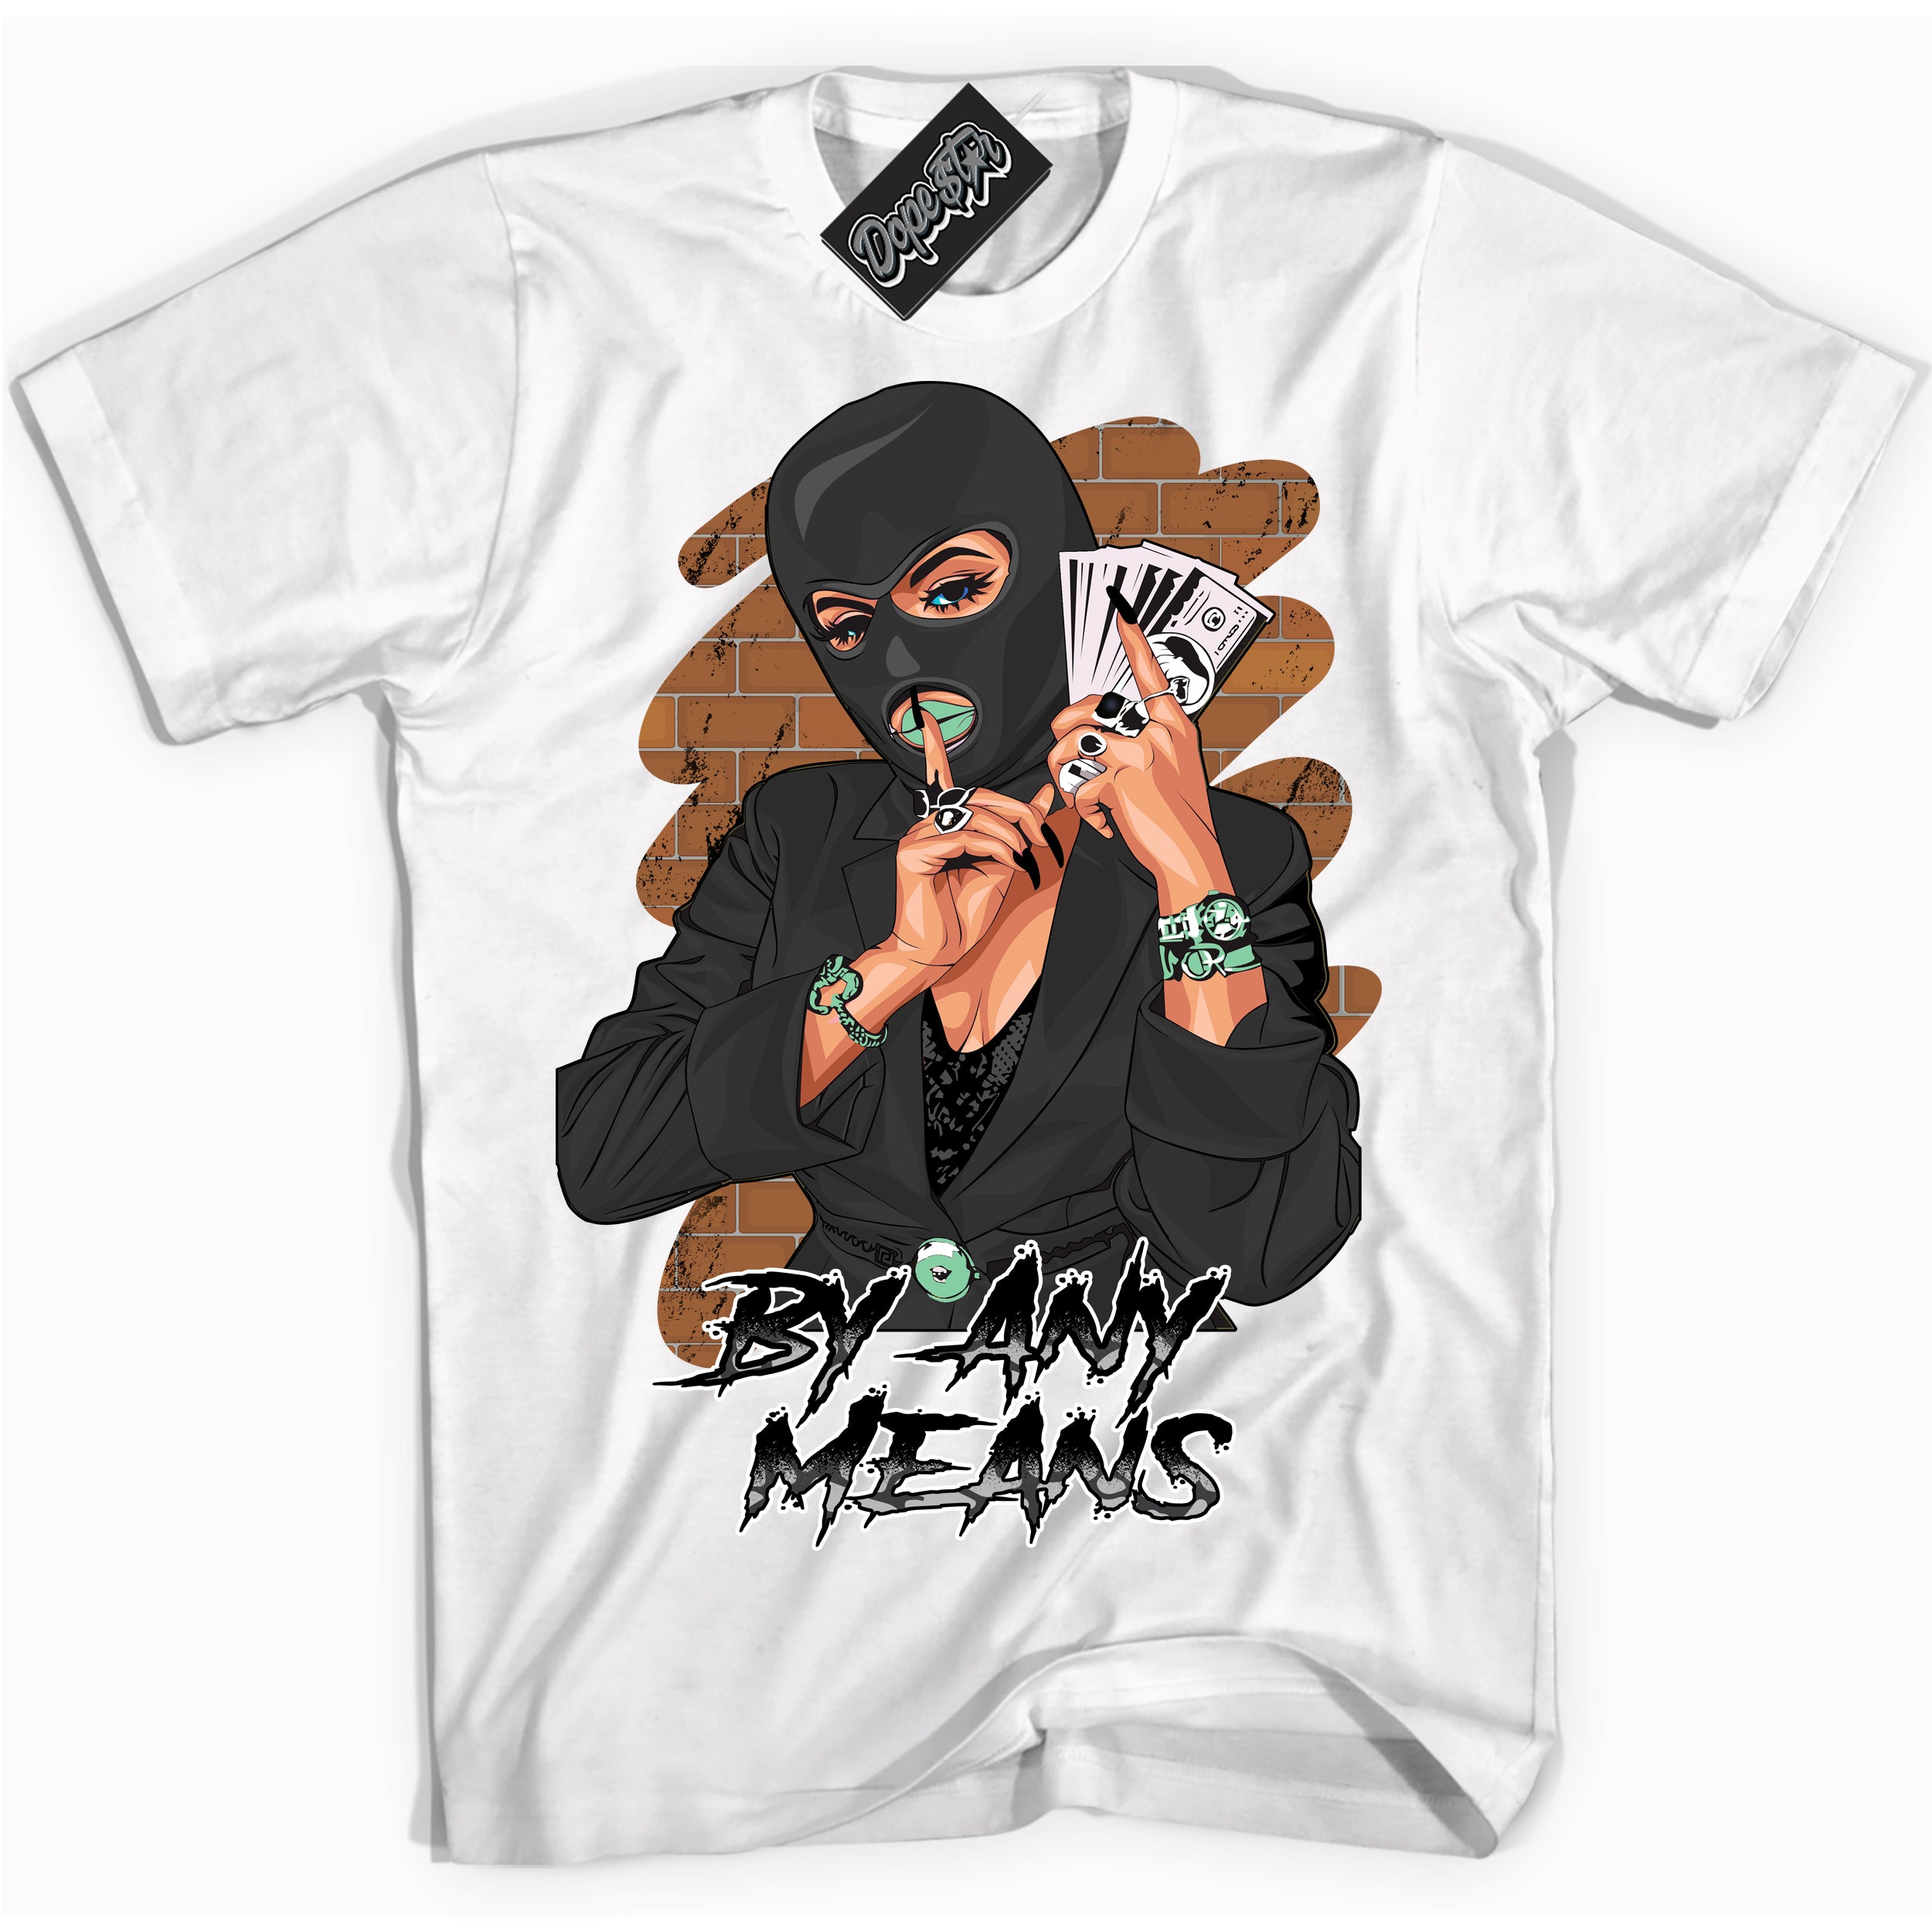 Cool White graphic tee with “ By Any Means ” design, that perfectly matches Green Glow 3s sneakers 